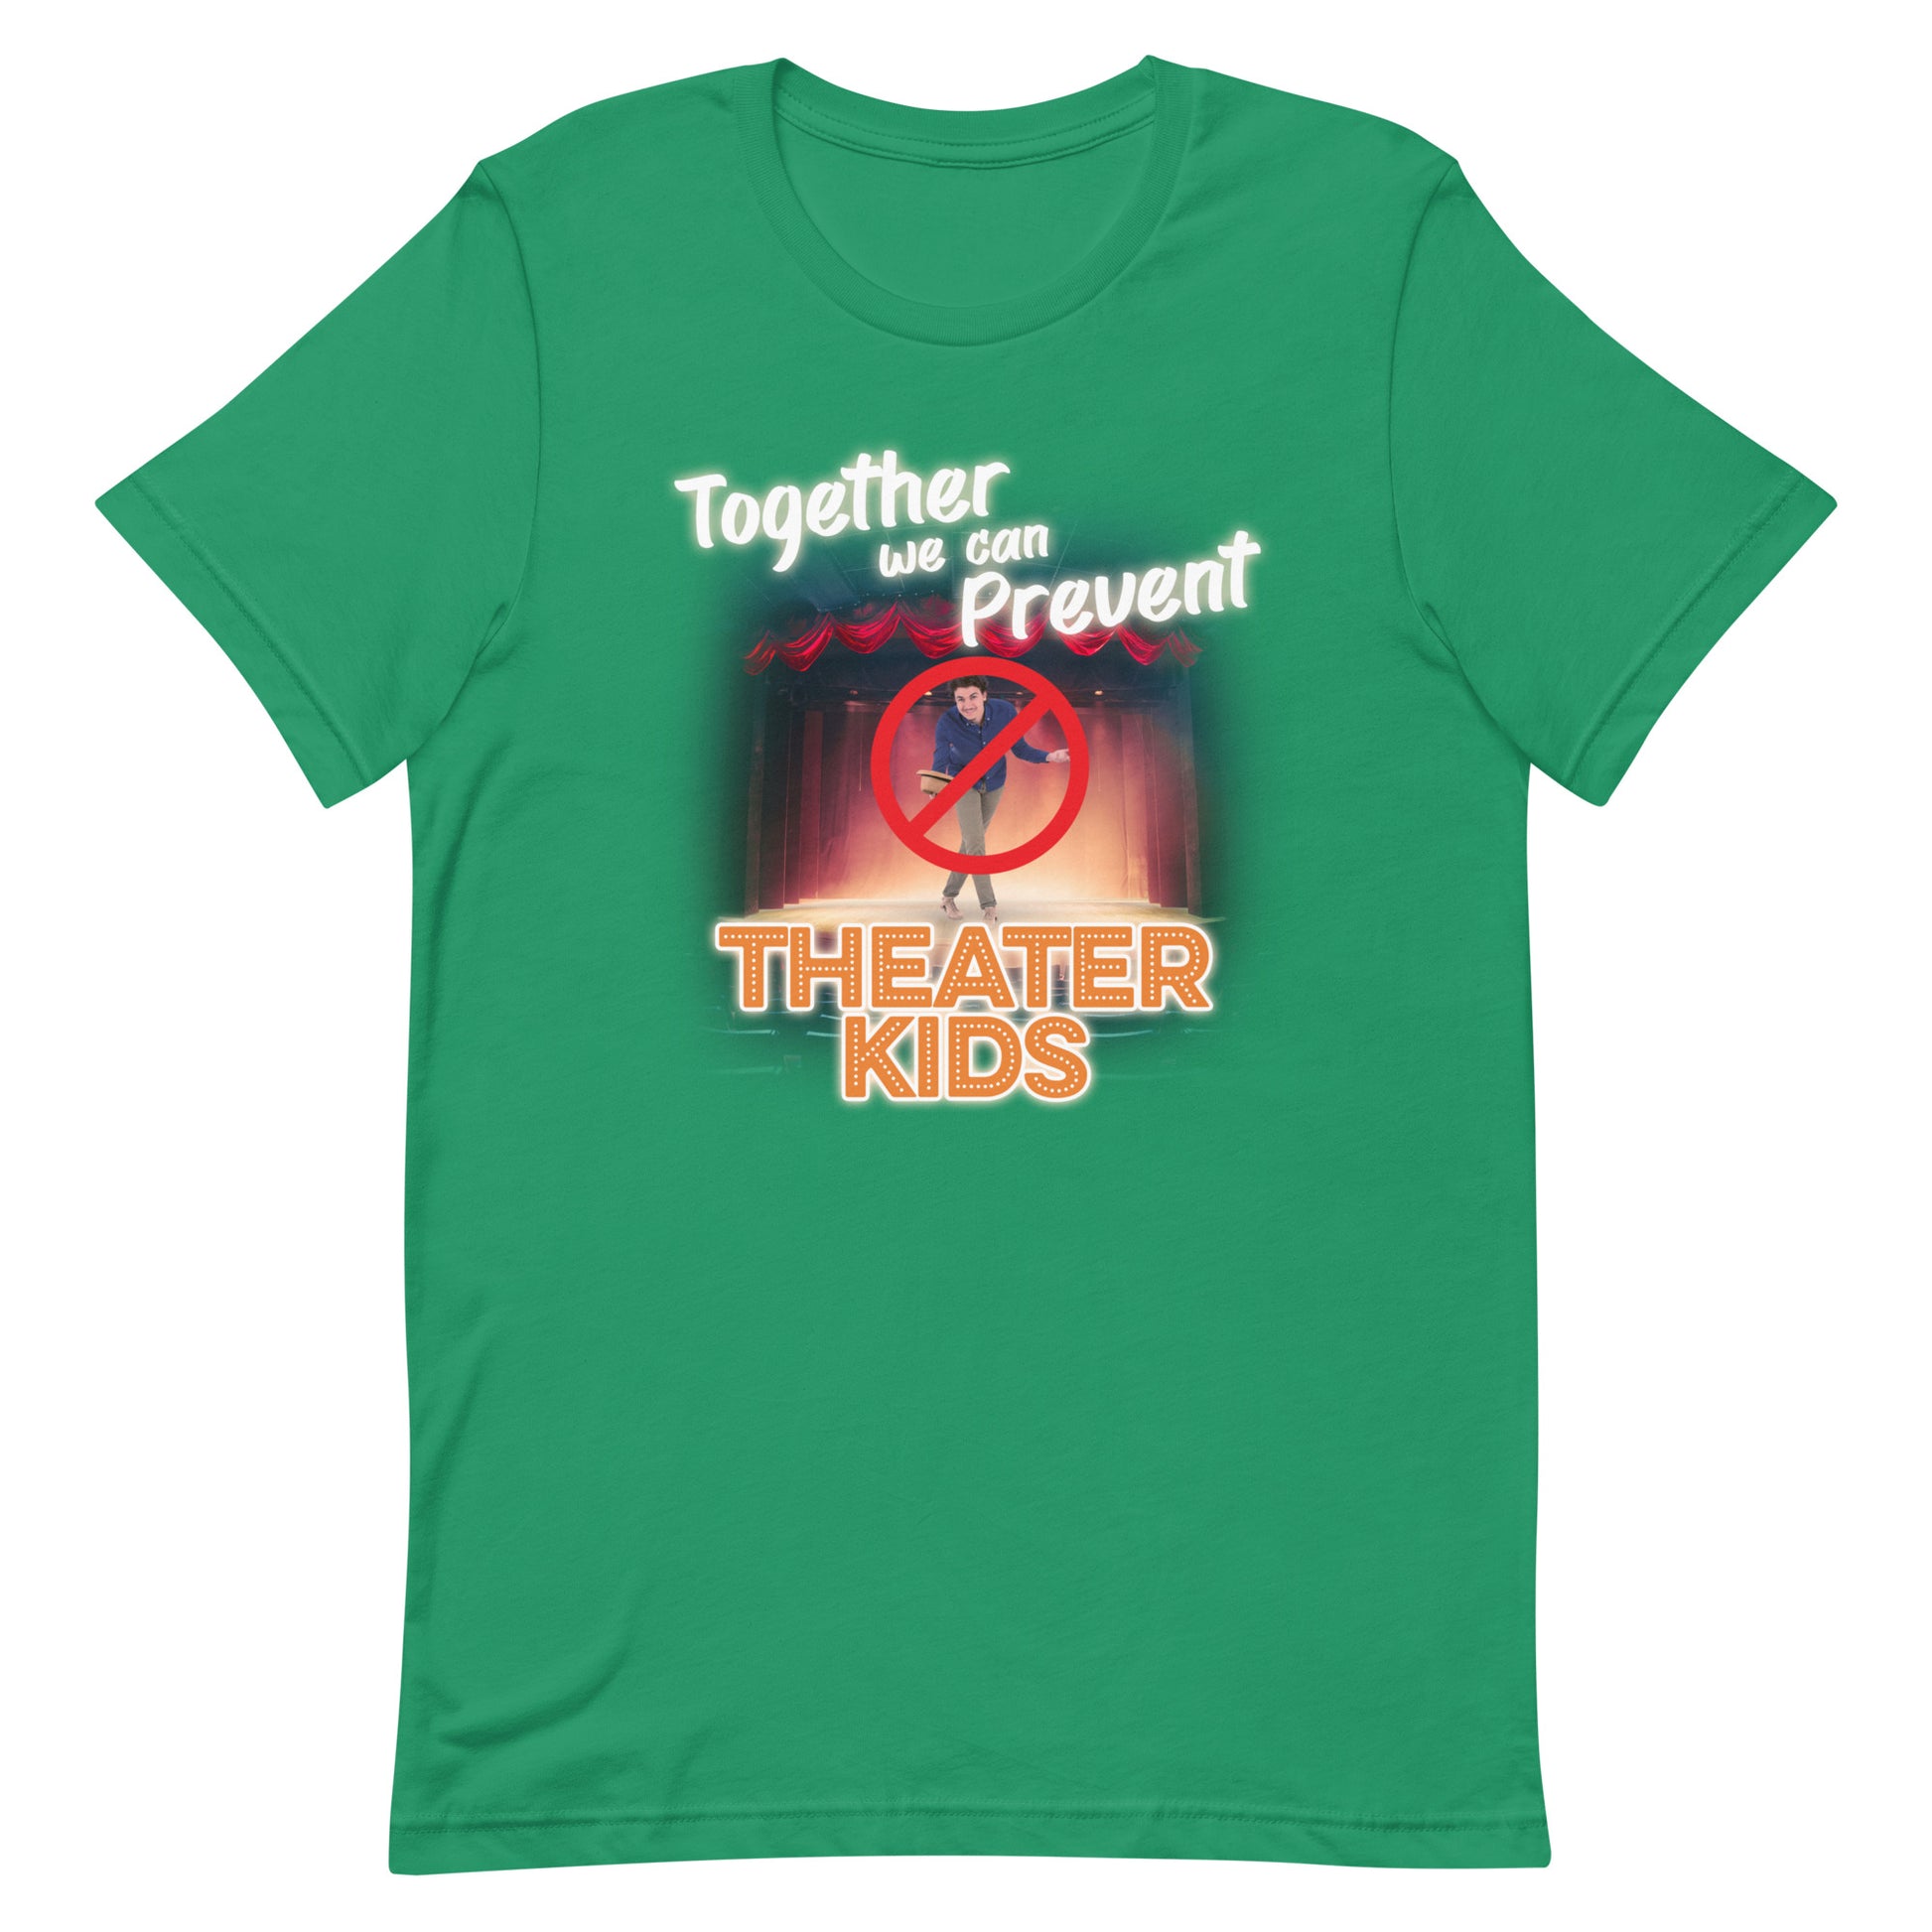 Prevent Can – Got Kids Together Funny? Unisex We t-shirt Theater